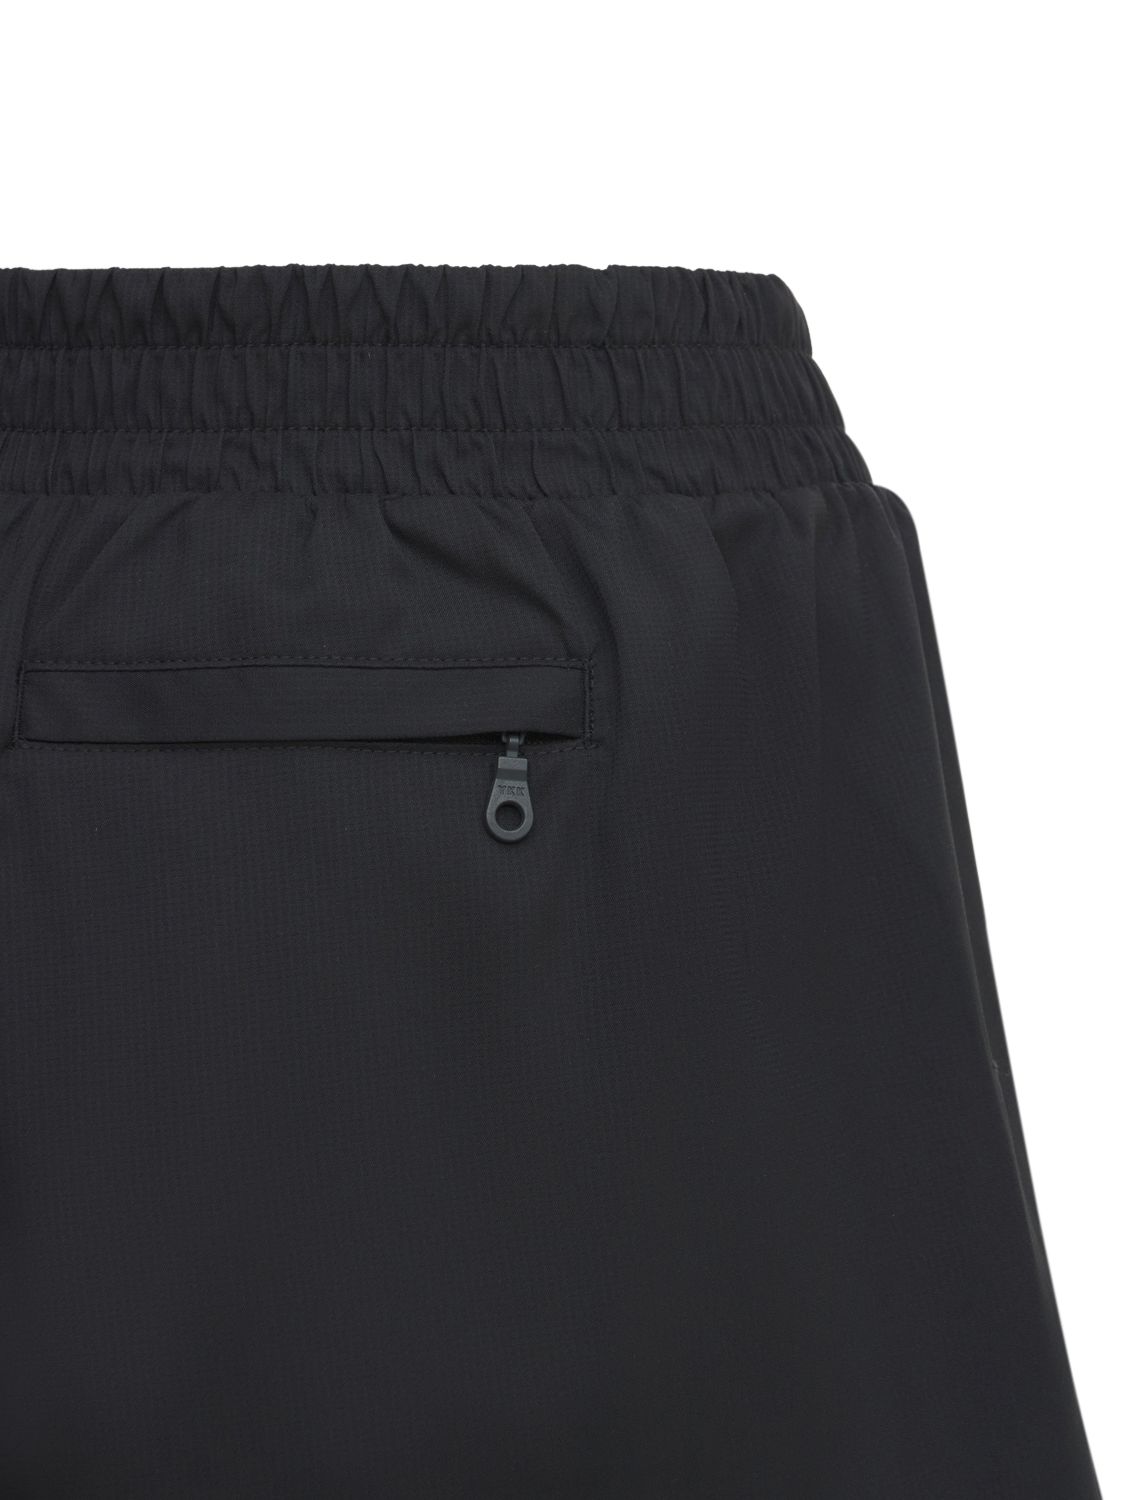 Shop Girlfriend Collective Gc Trail Shorts In Black